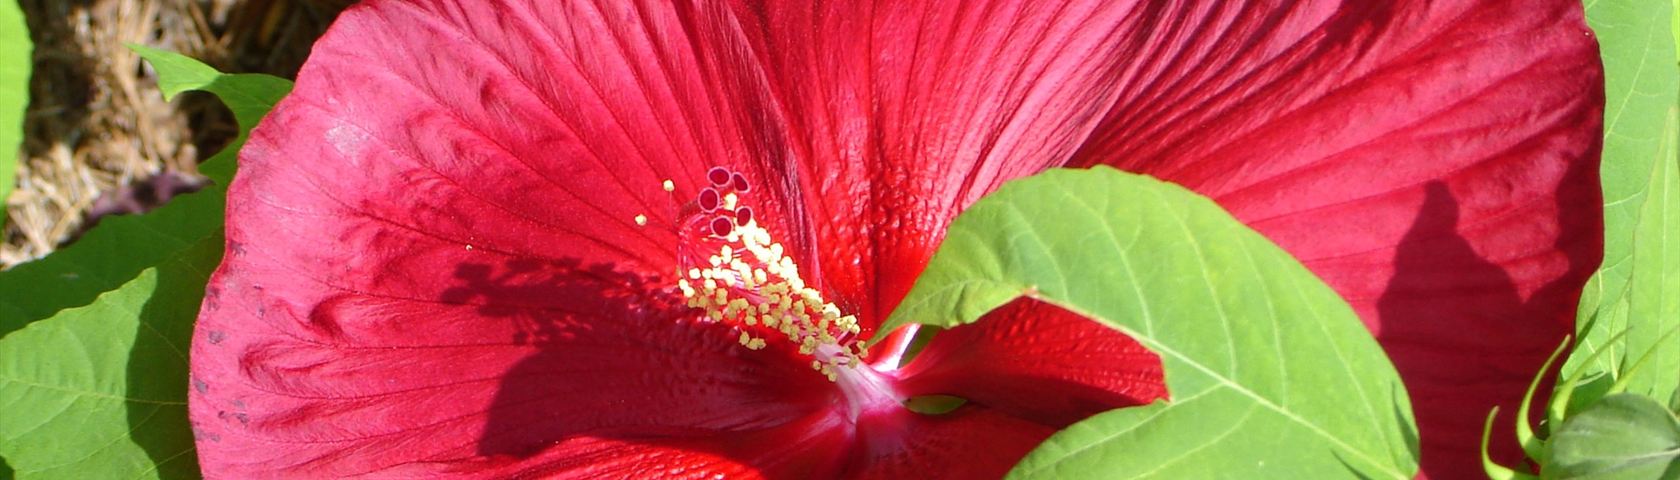 Red Flower Close Up